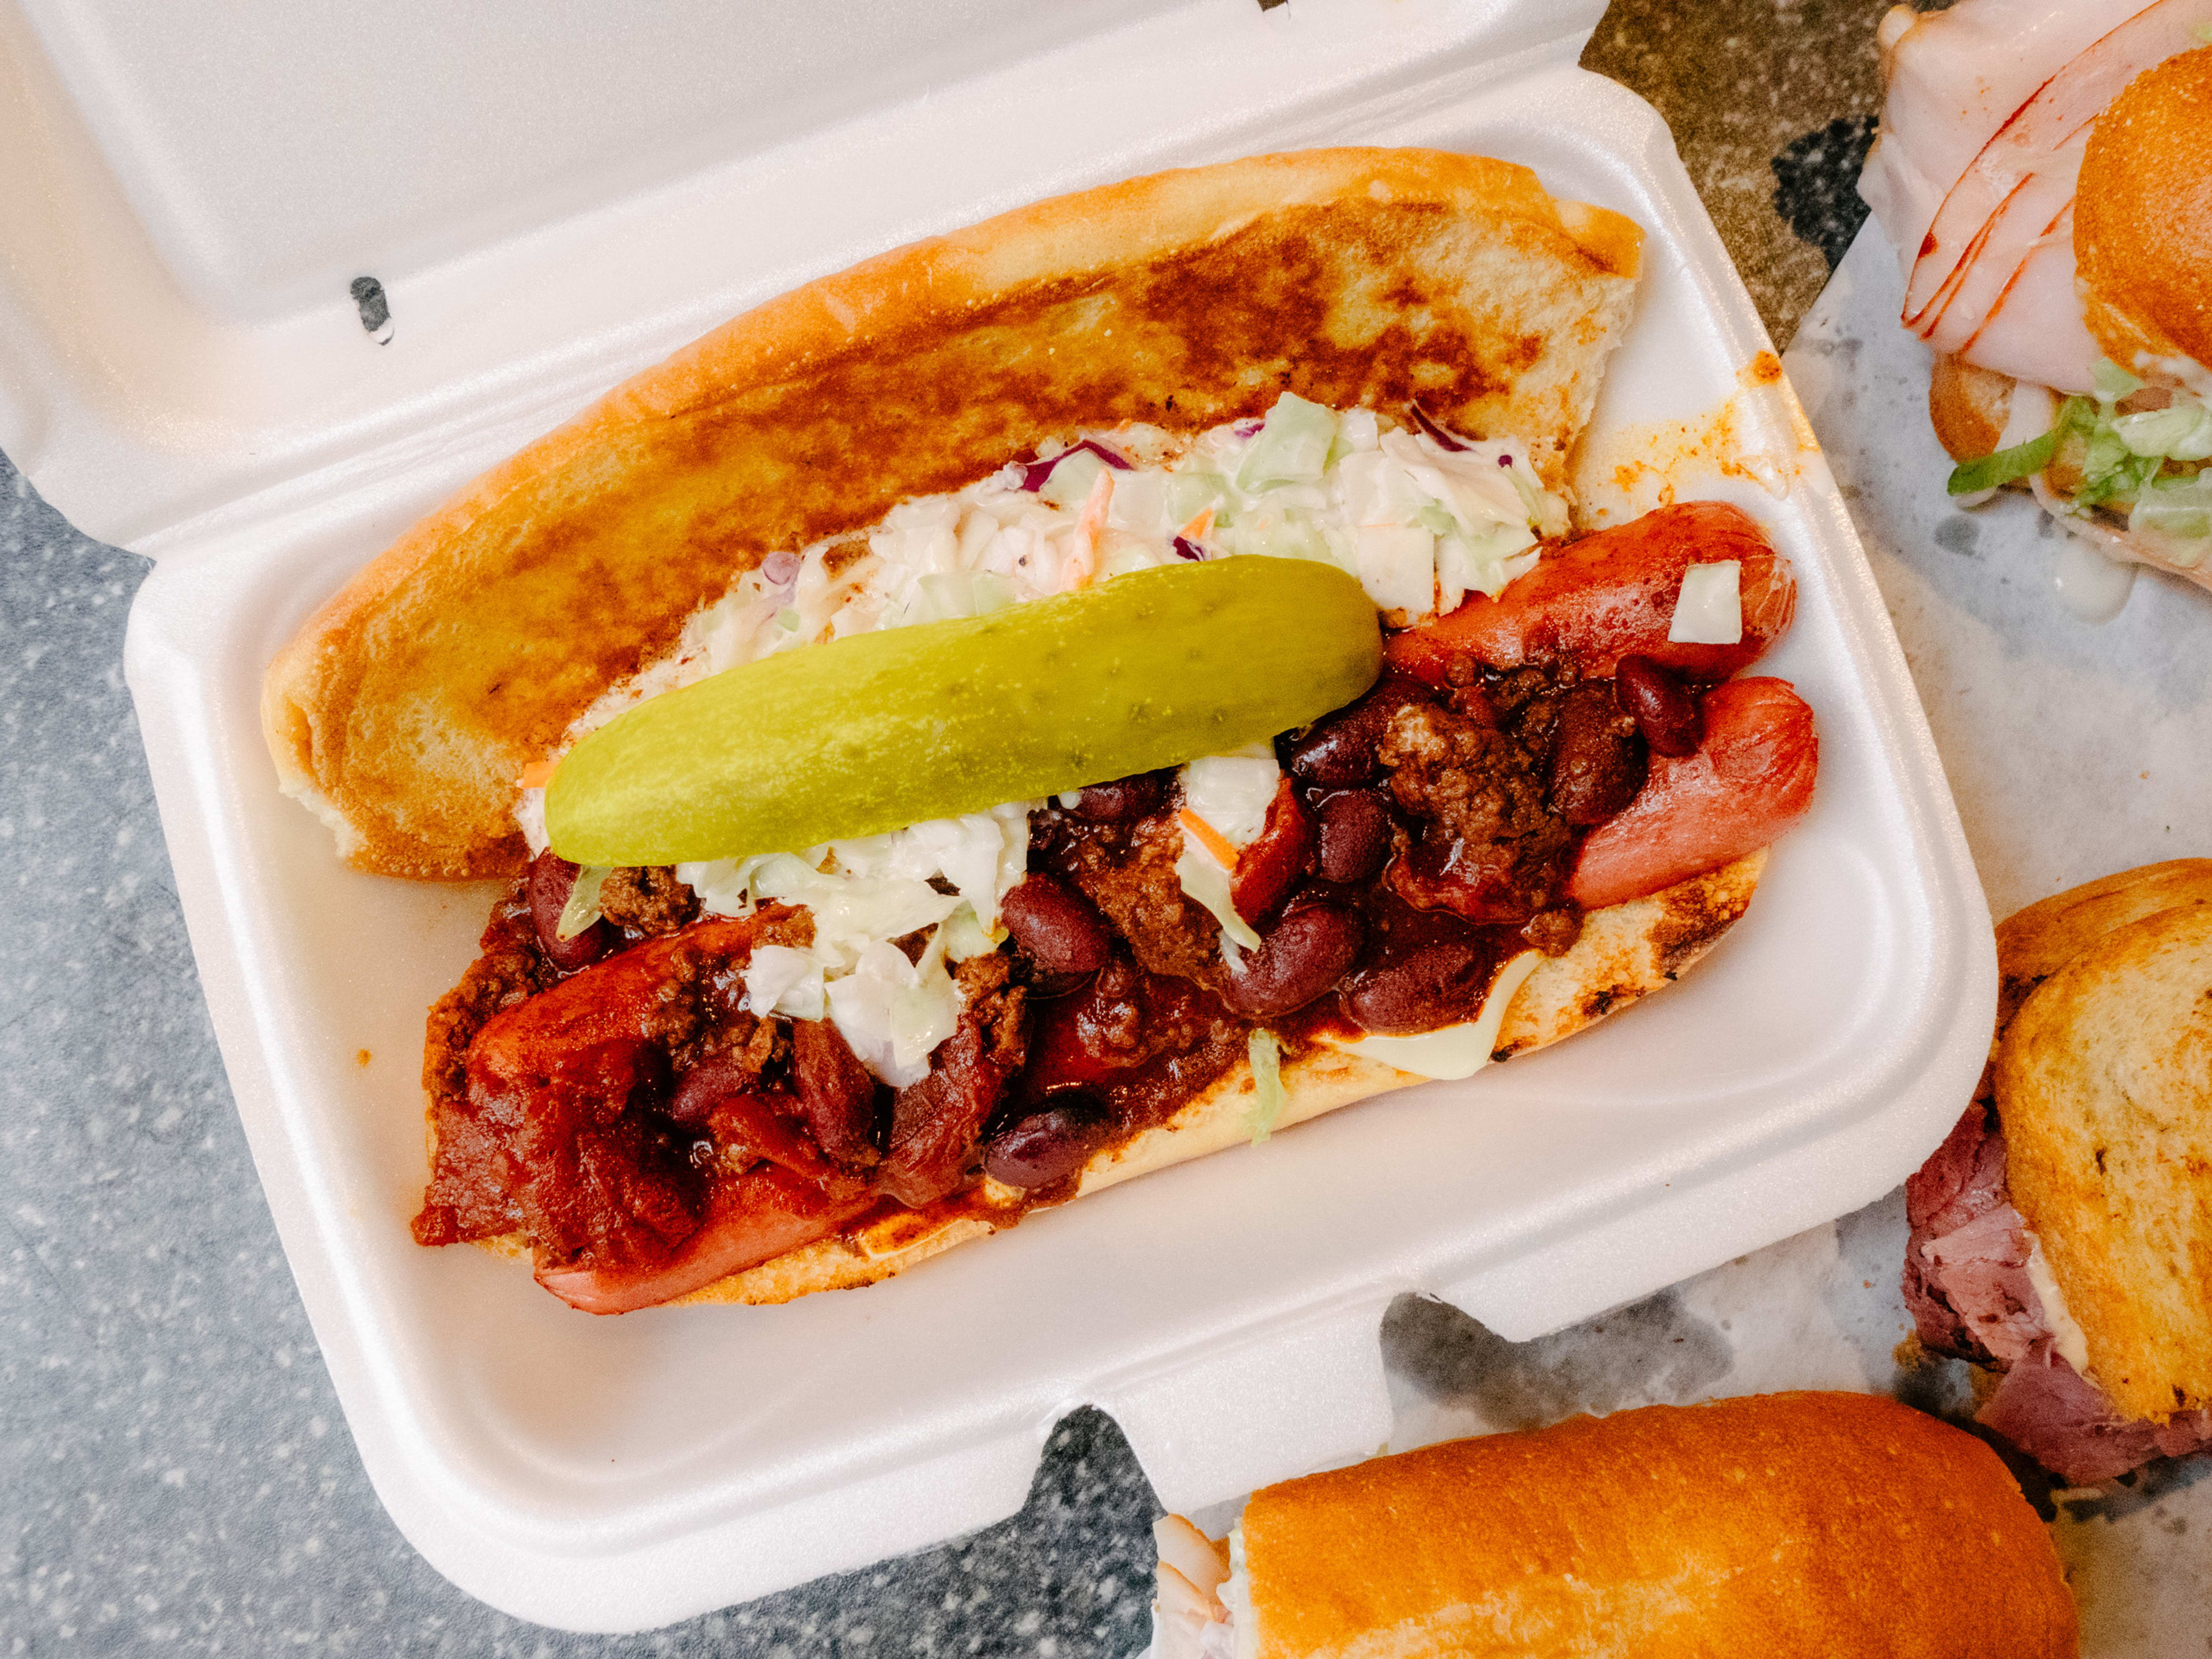 A massive hot dog with cheese, chili, and slaw.